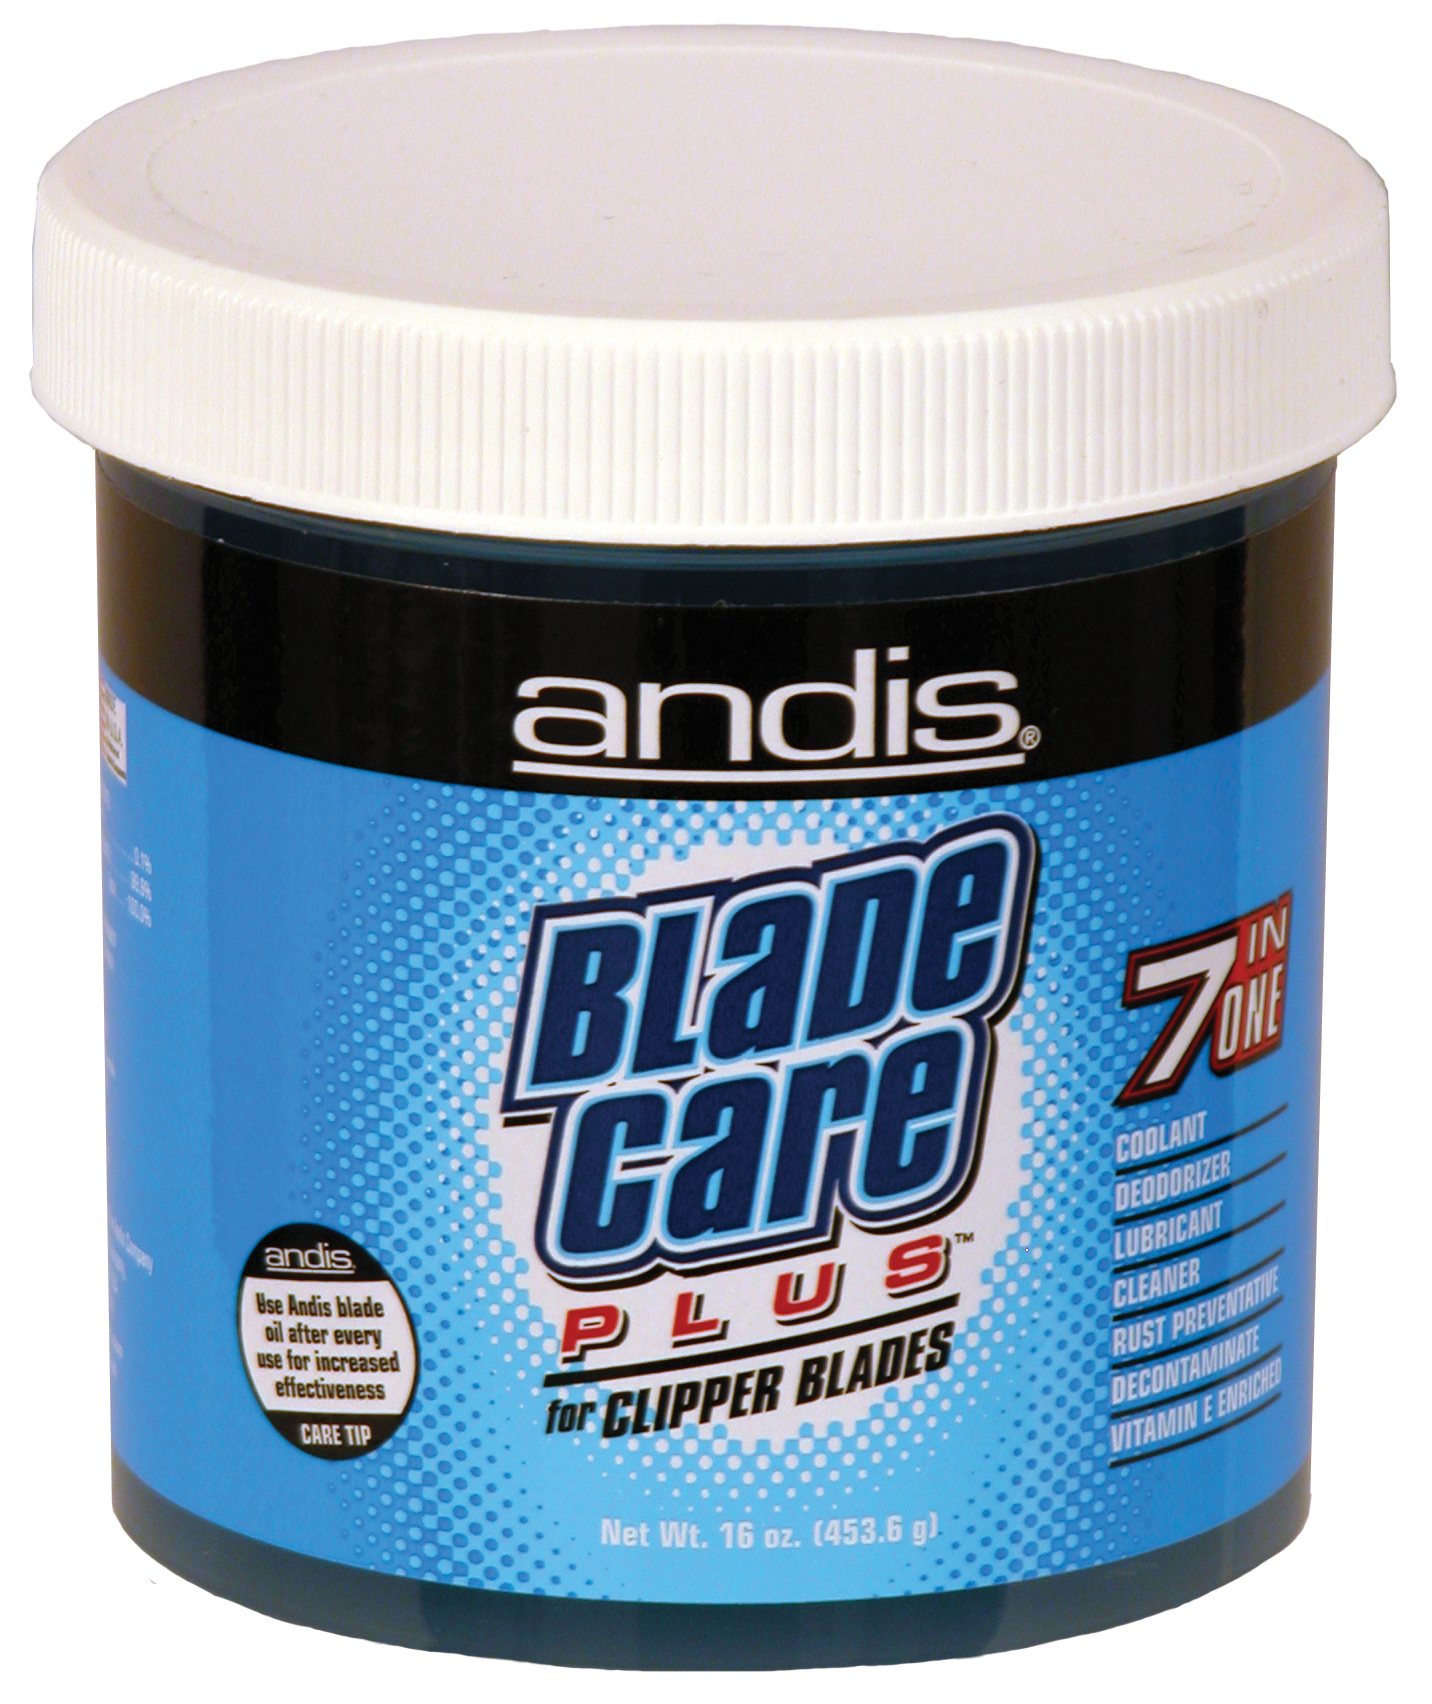 Andis Blade care plus 7 in 1 400g